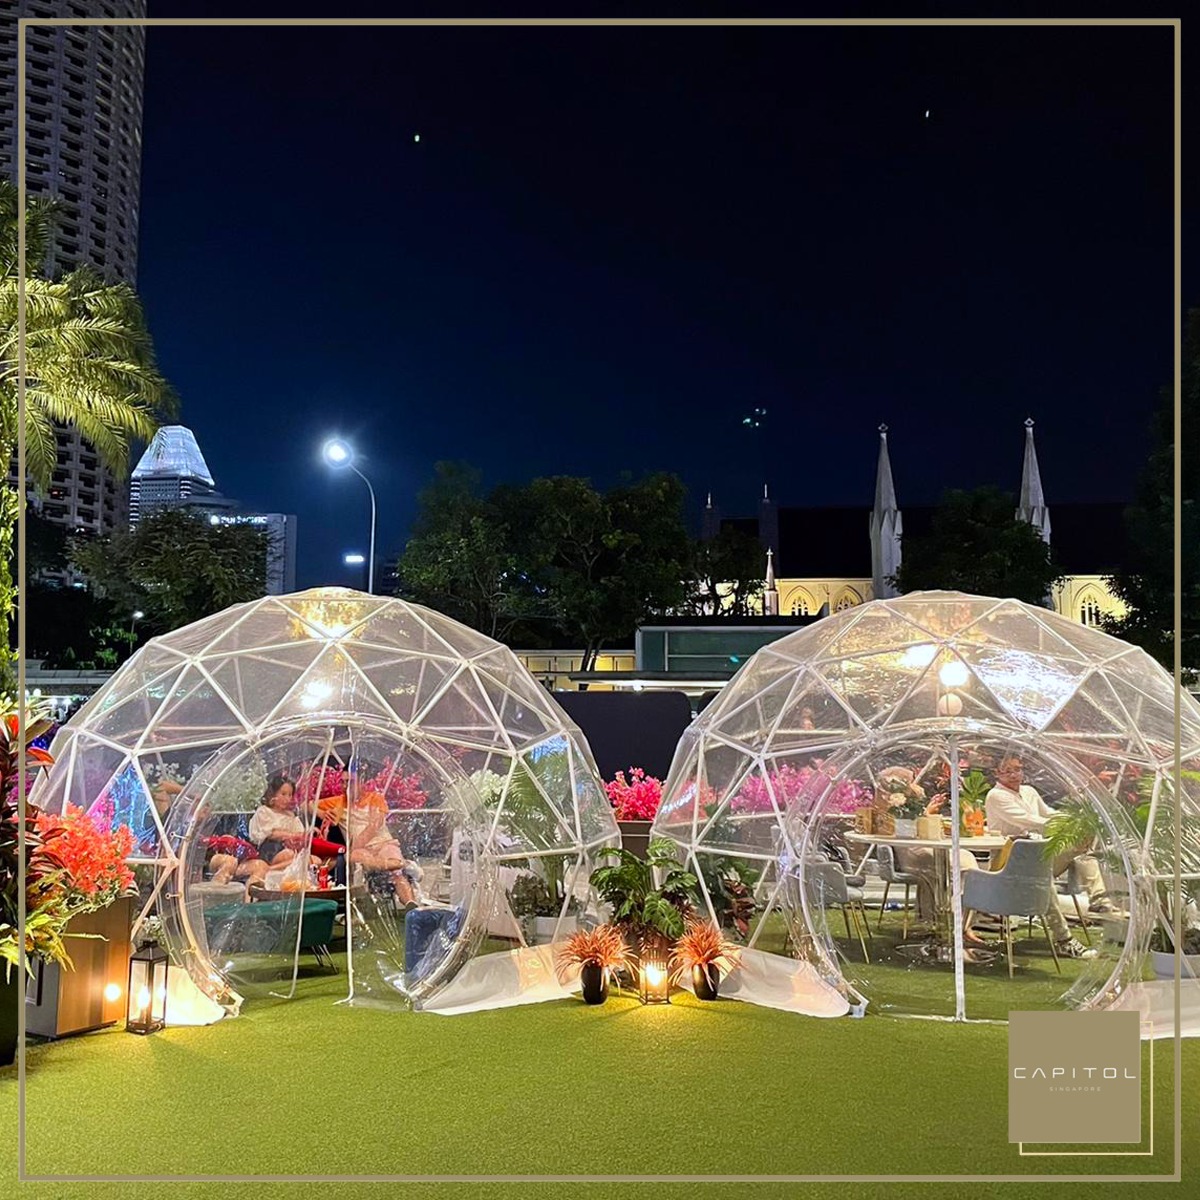 Capitol S'pore's Outdoor Plaza has 'dome dining experience' with board ...